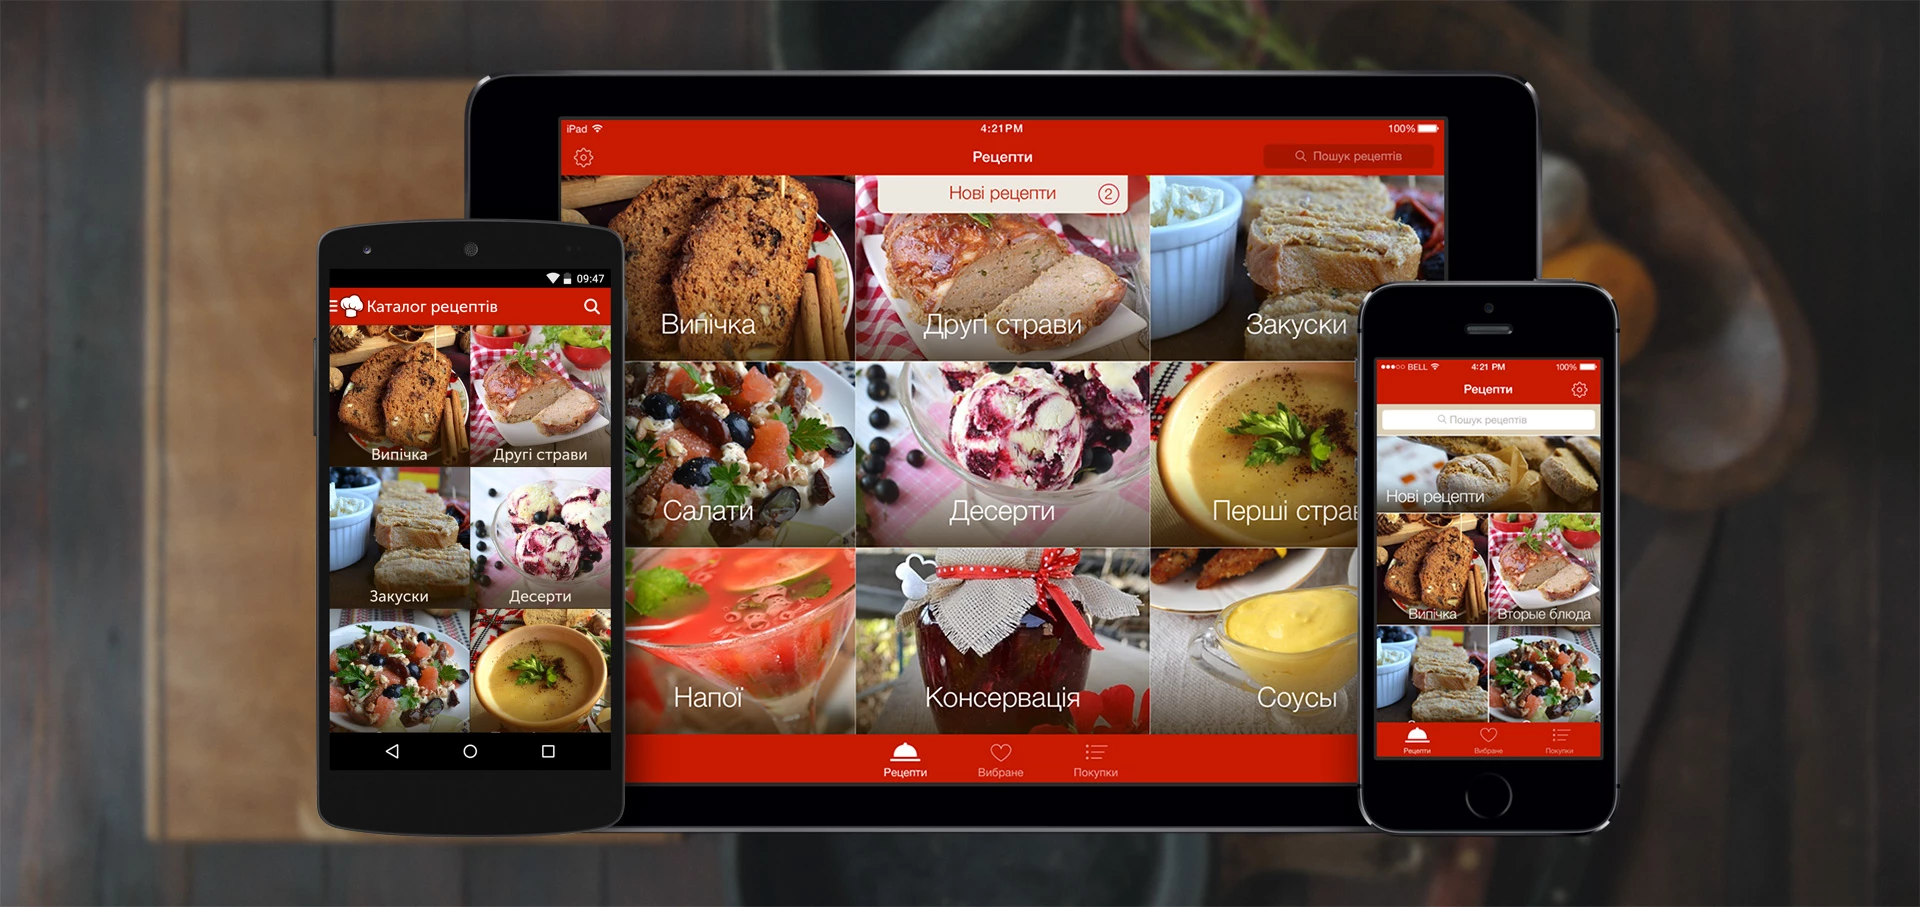 Cooking app for smartphones and tablets working on Android and iOS